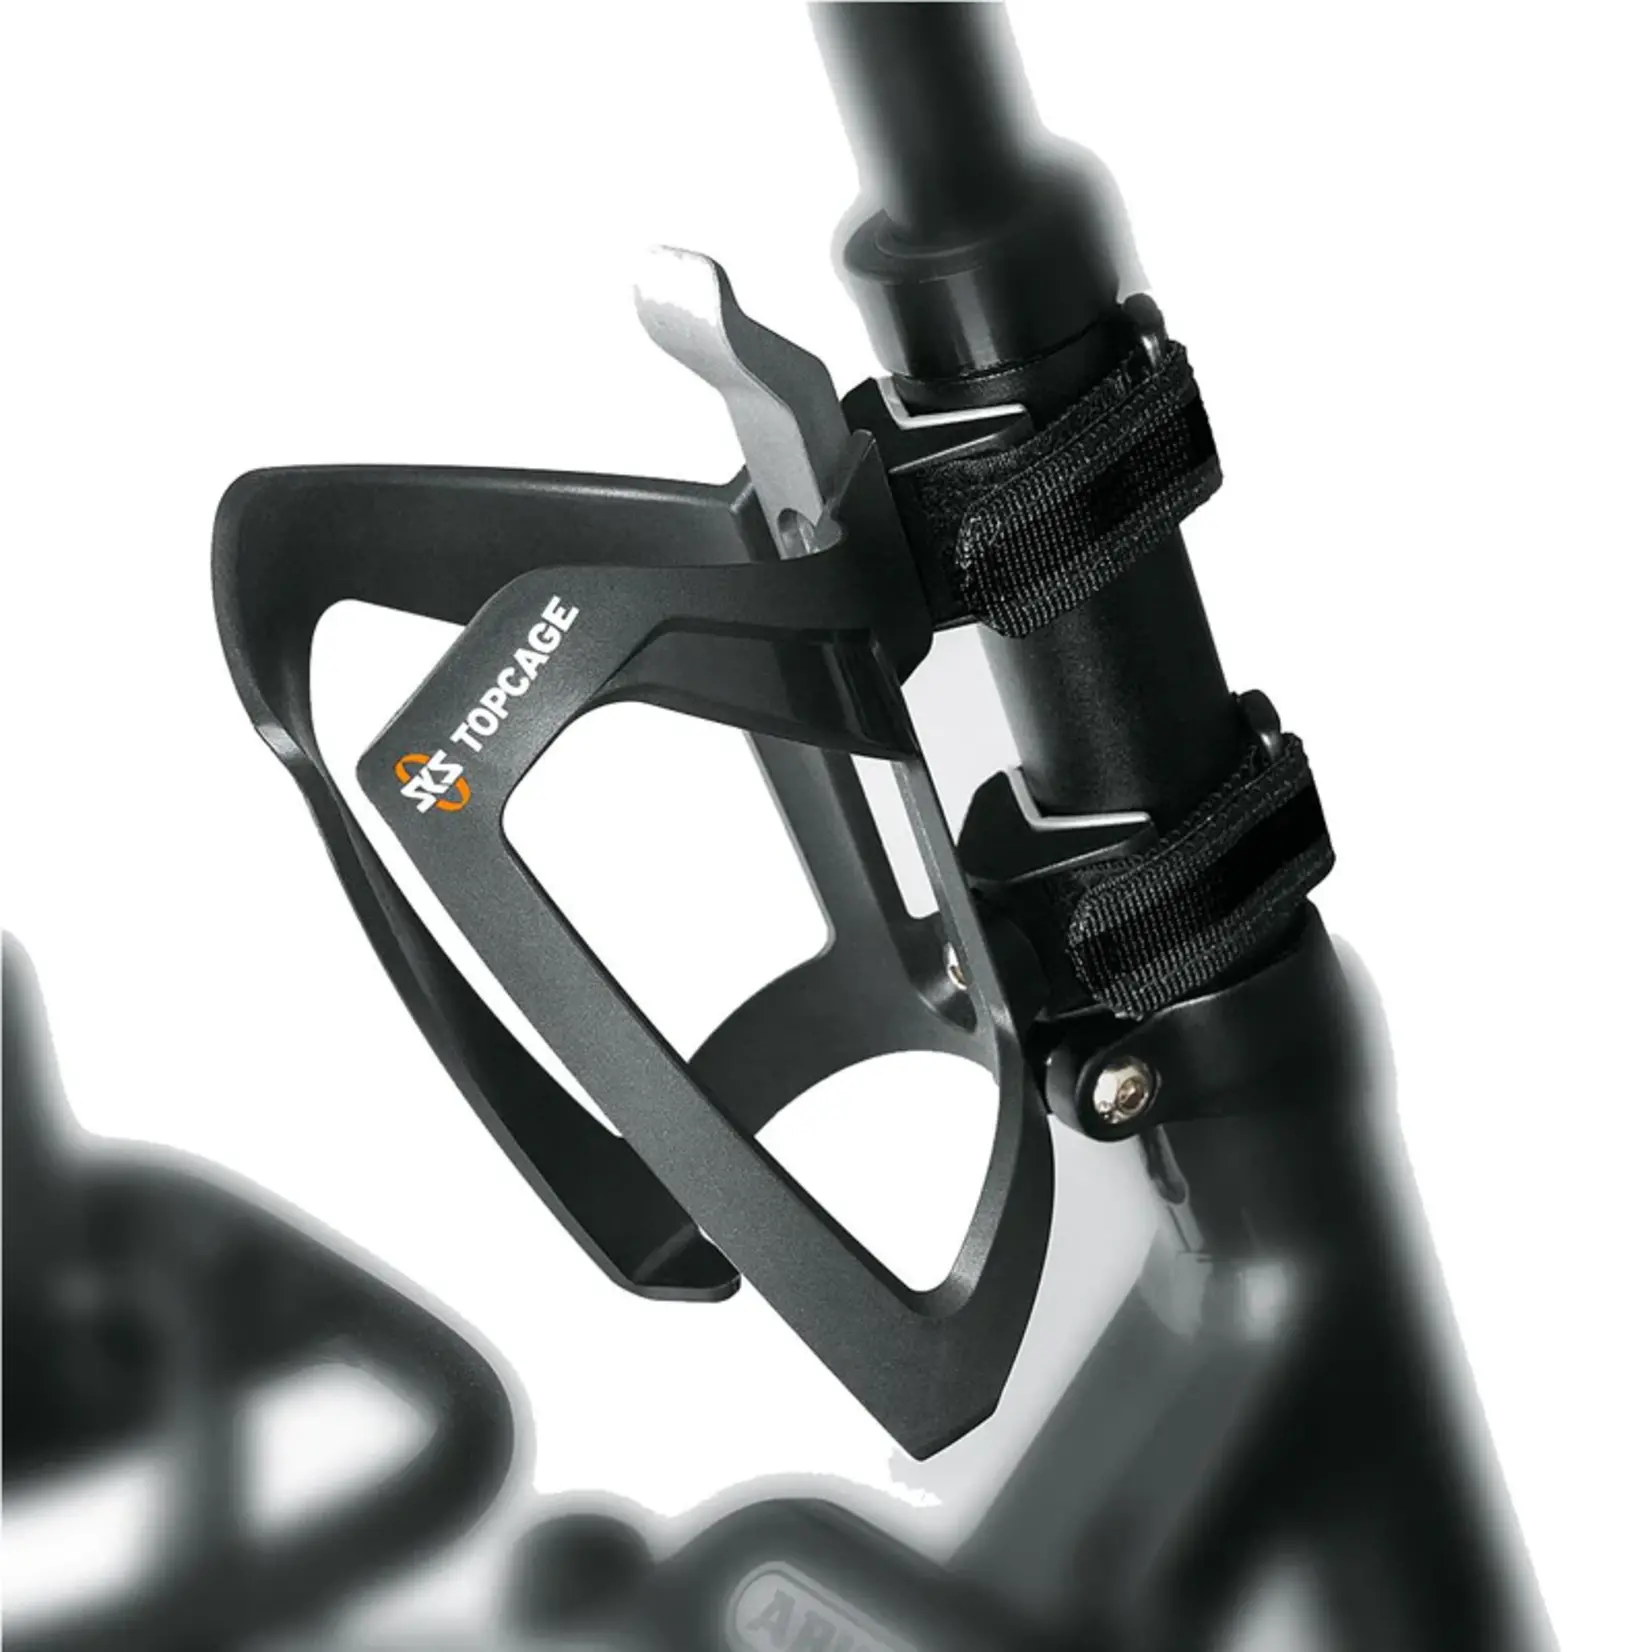 SKS SKS ANYWHERE BOTTLE CAGE ADAPTER